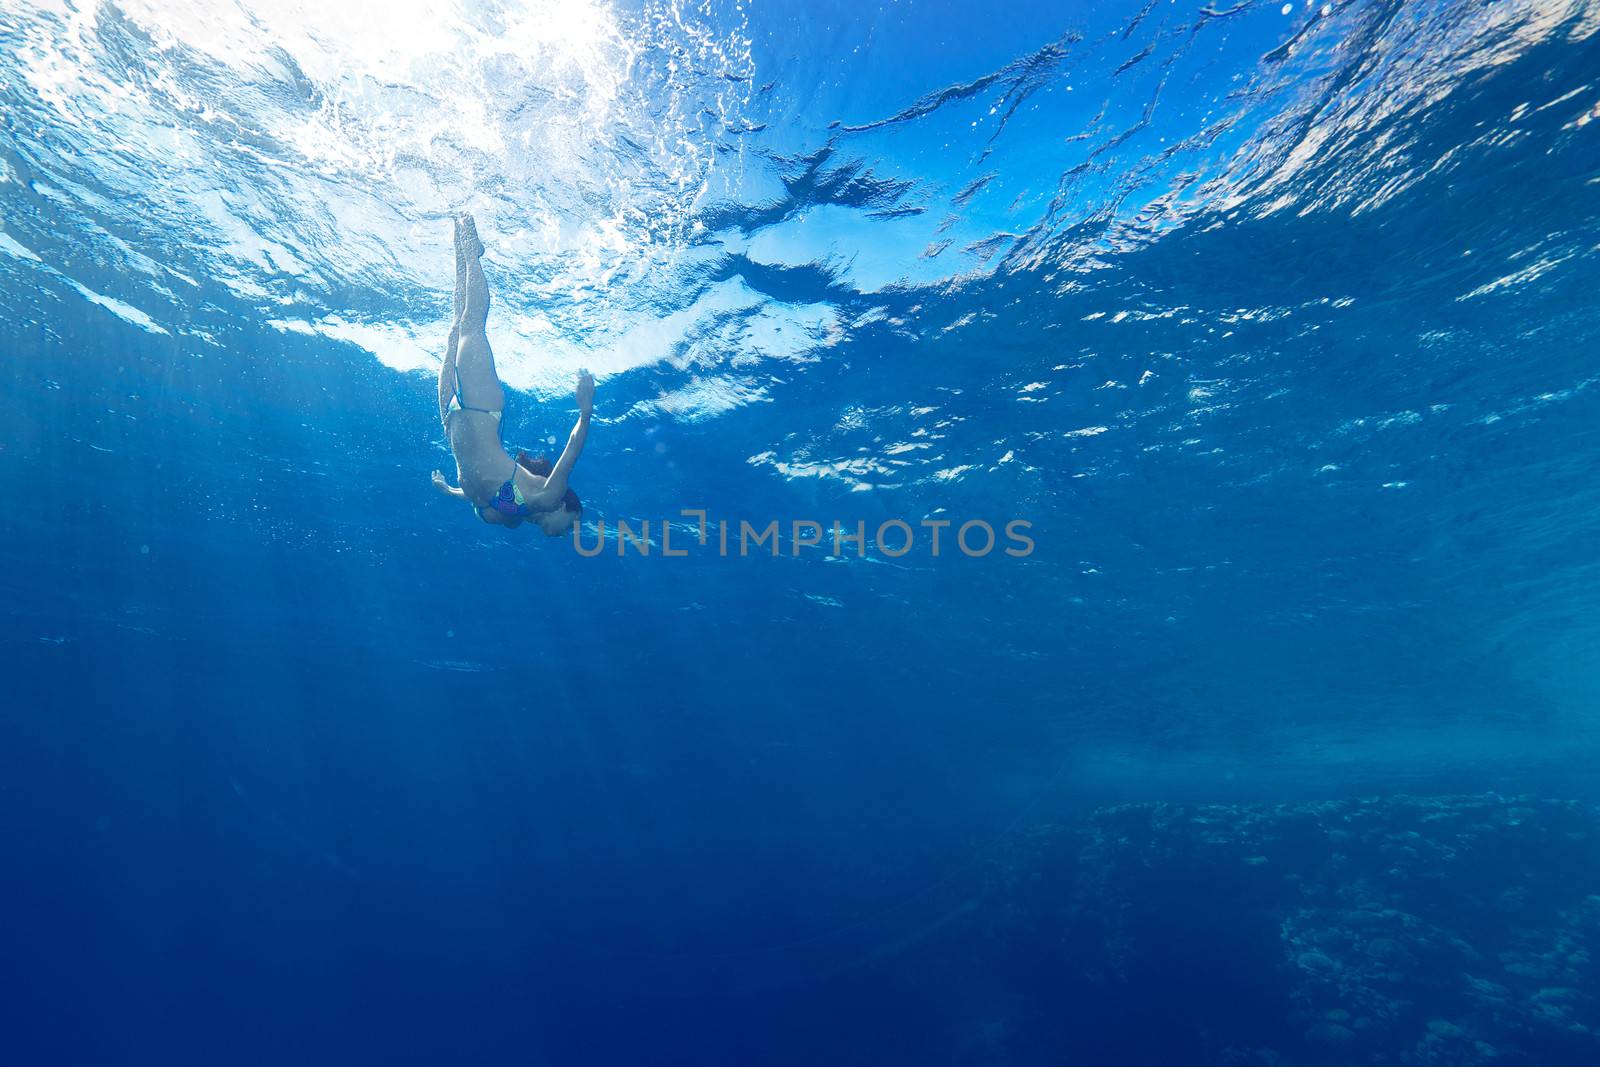 athletic girl diving under the sea